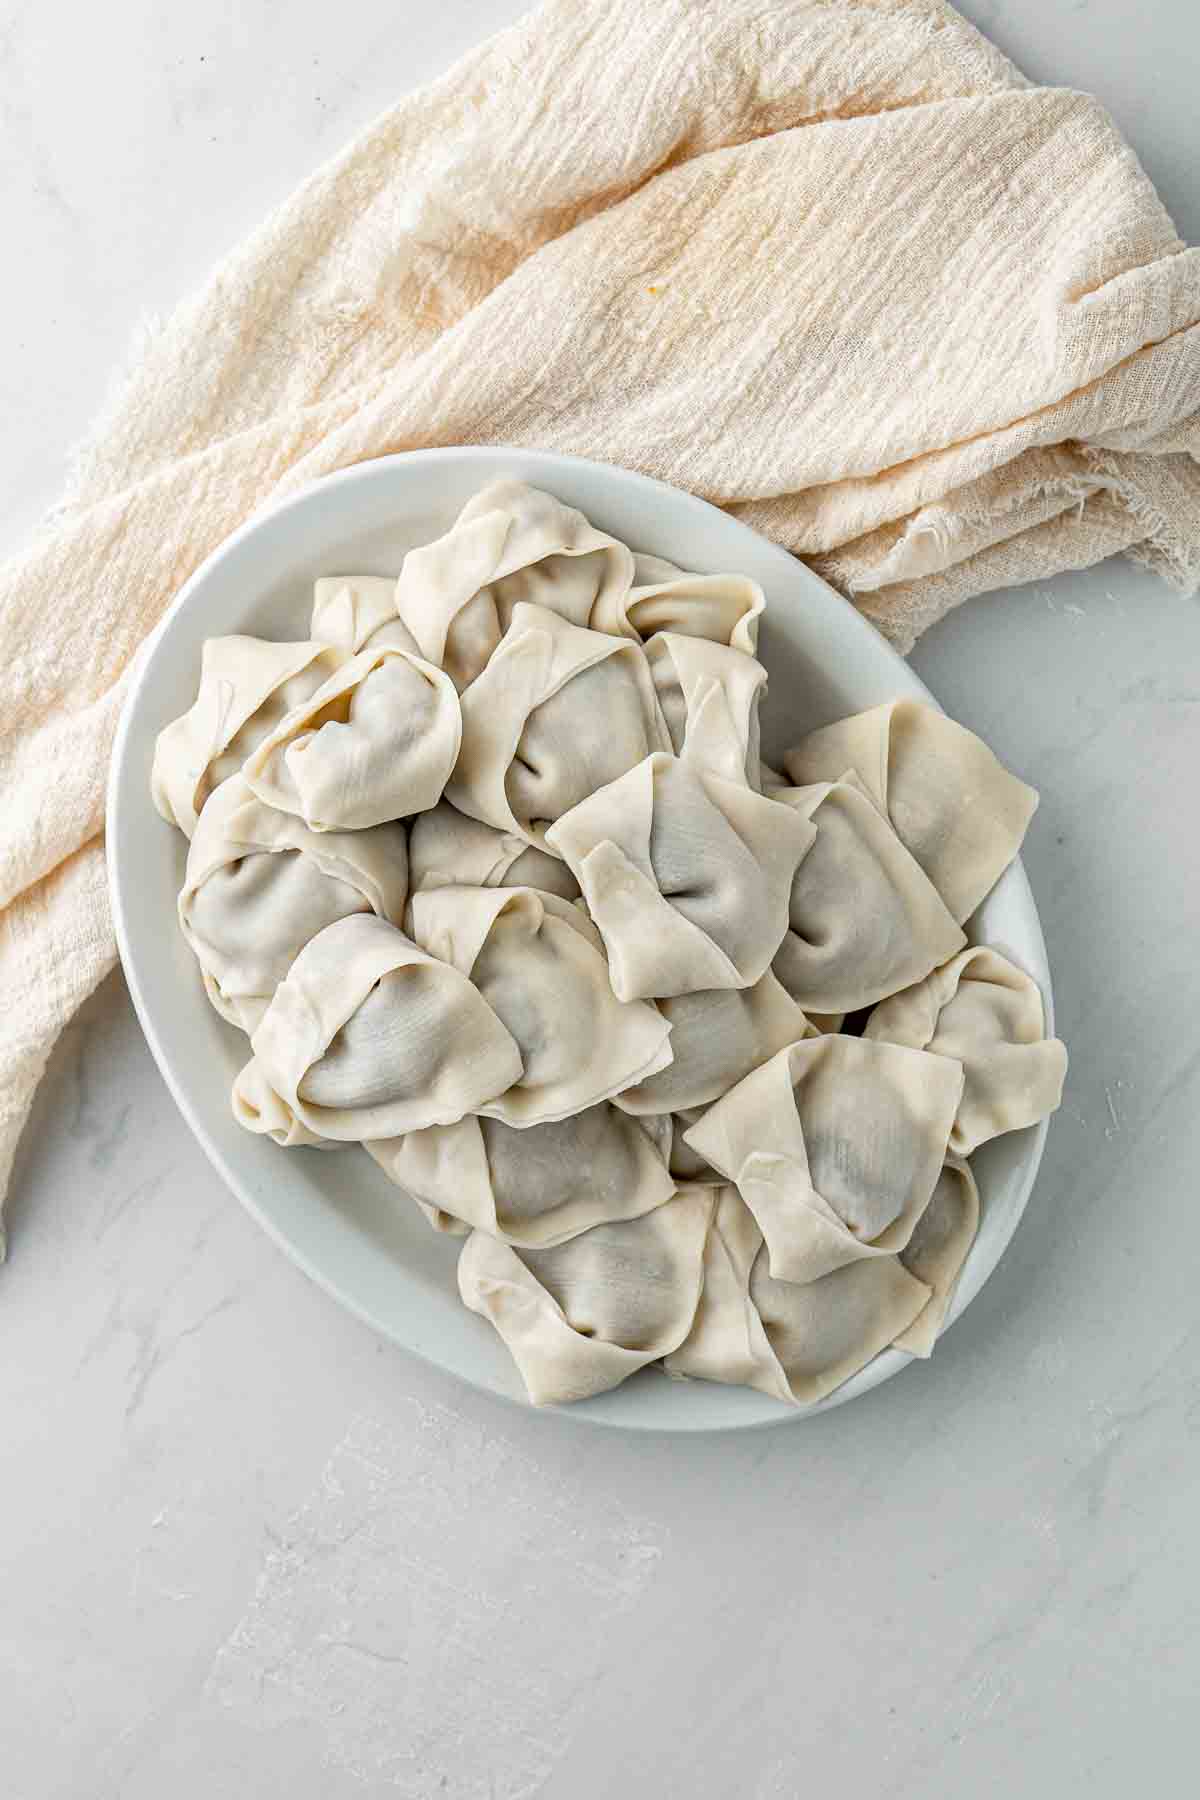 Filled wontons folded and ready to cook on a plate.